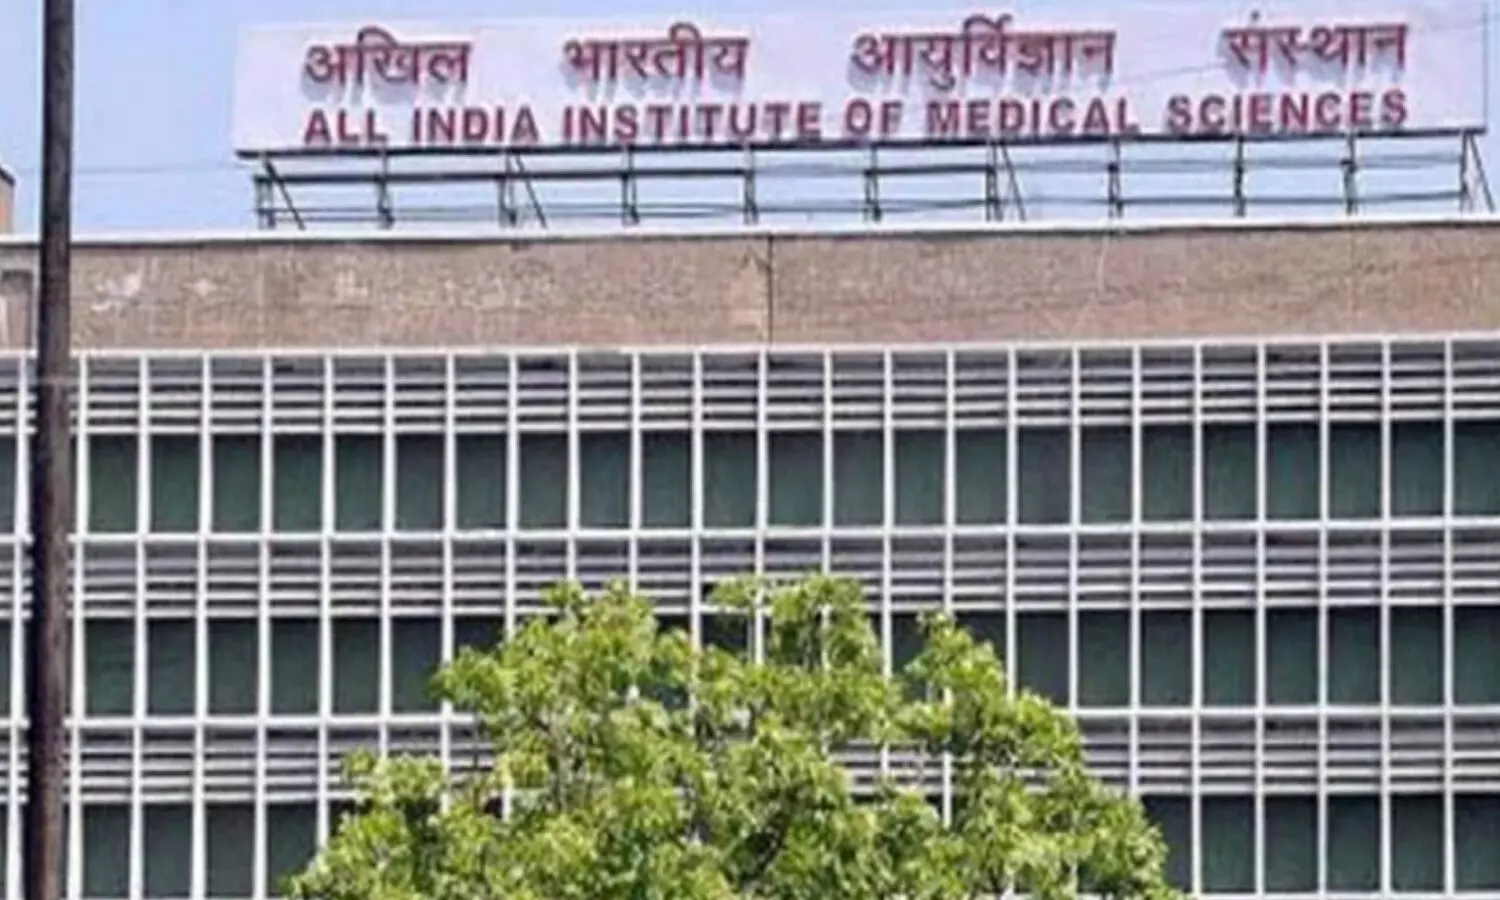 With MCI nod on Telemedicine, AIIMS to begin tele-consultation facility for patients